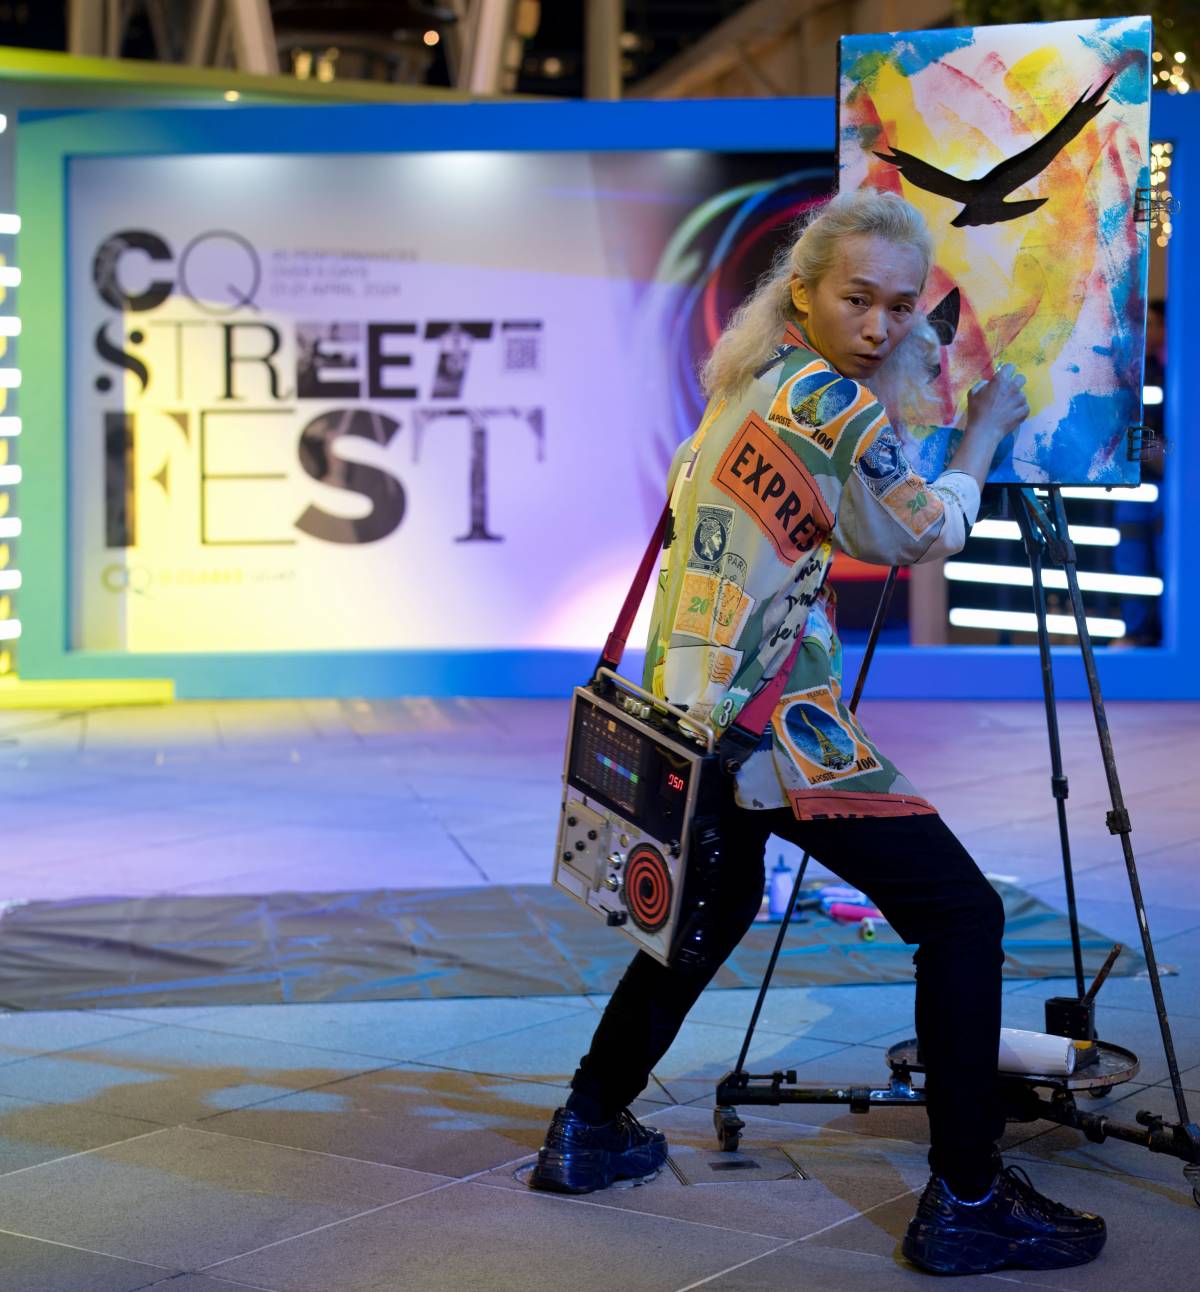 Streetfest has an electrifying start at Clarke Quay